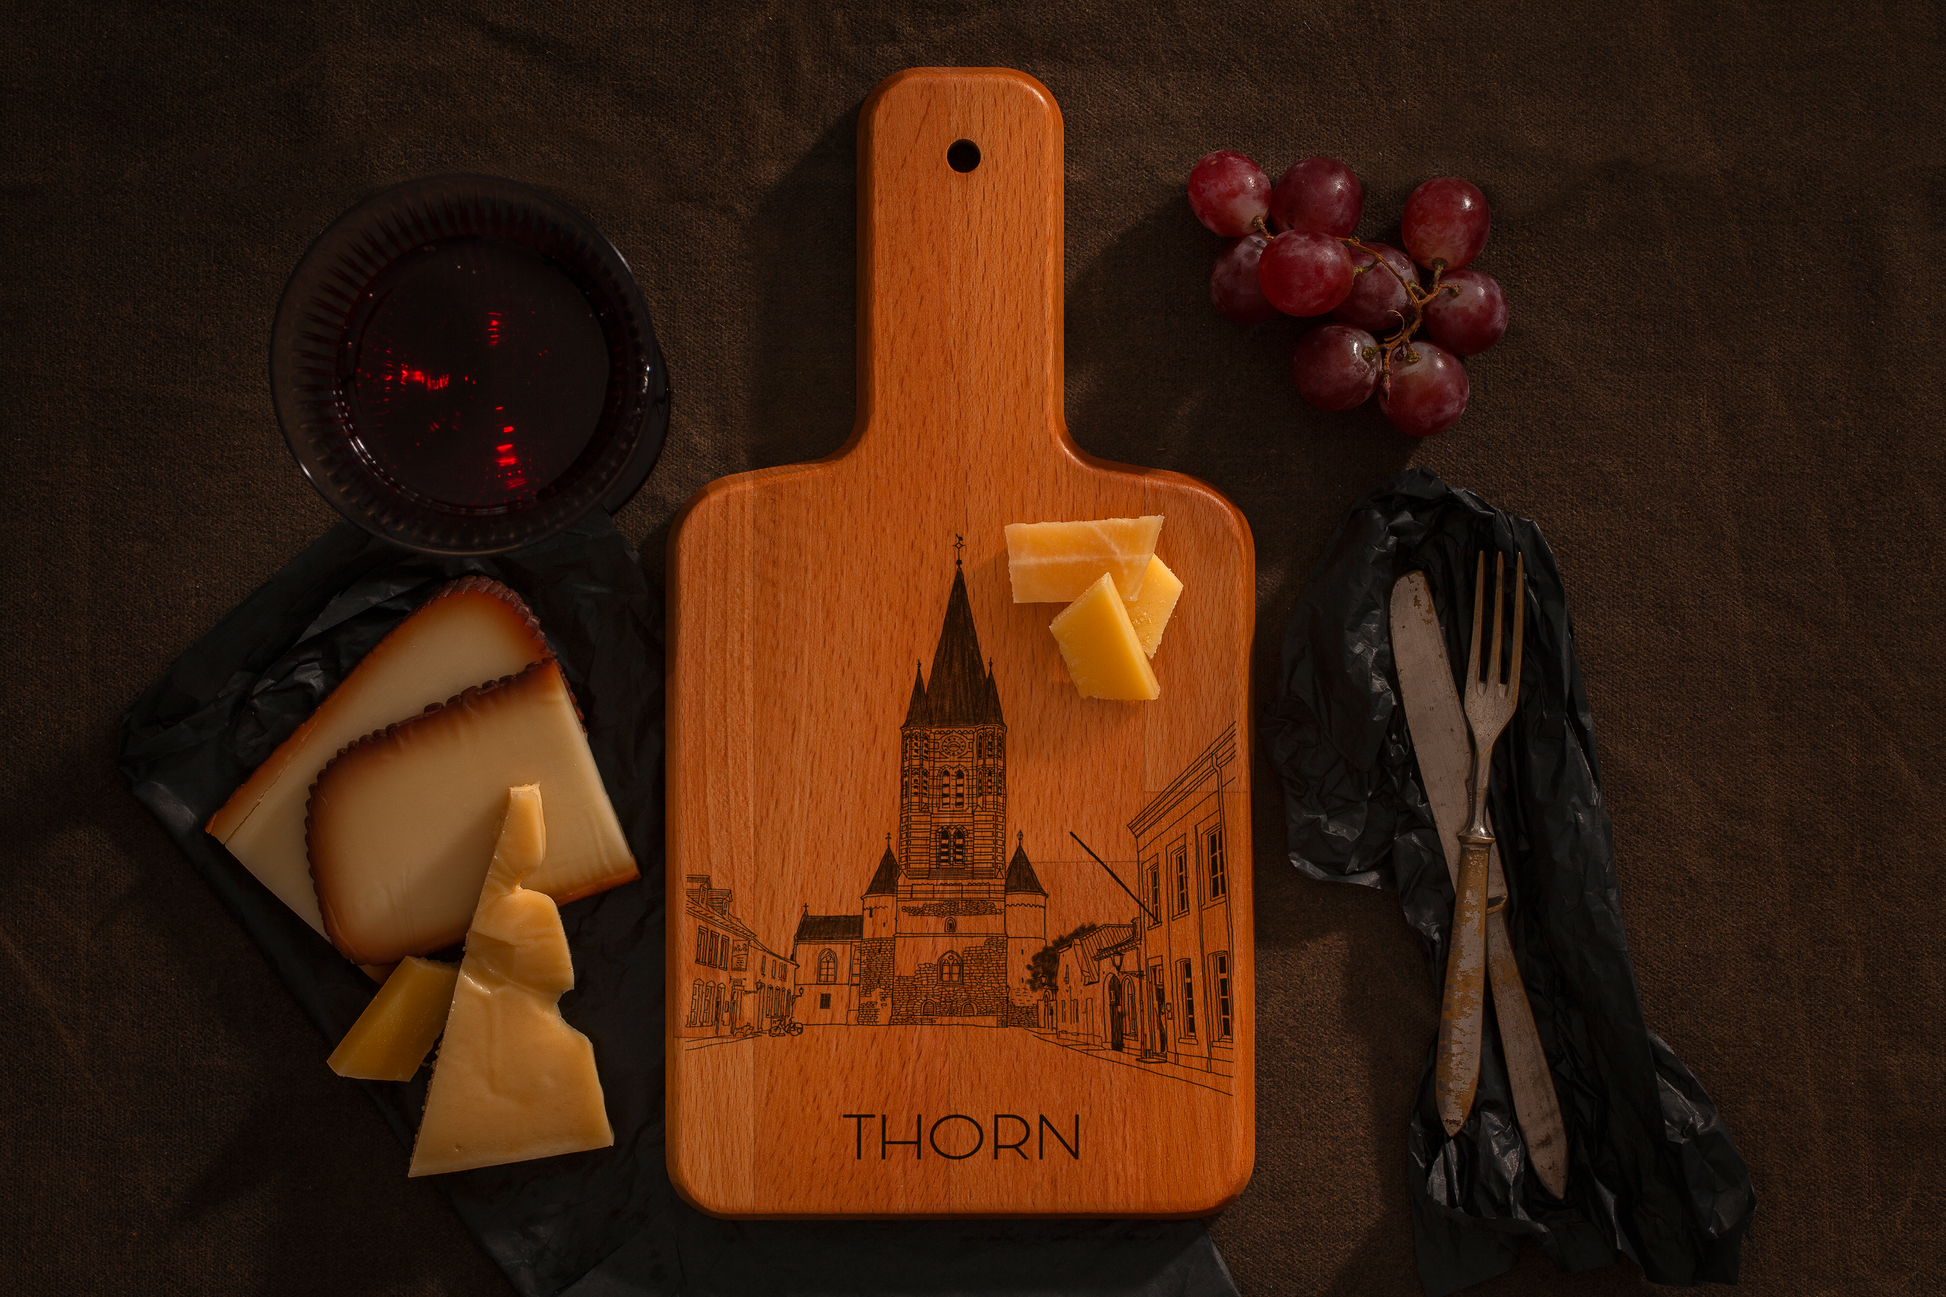 Thorn, Abdij Kerk, cheese board, with cheese